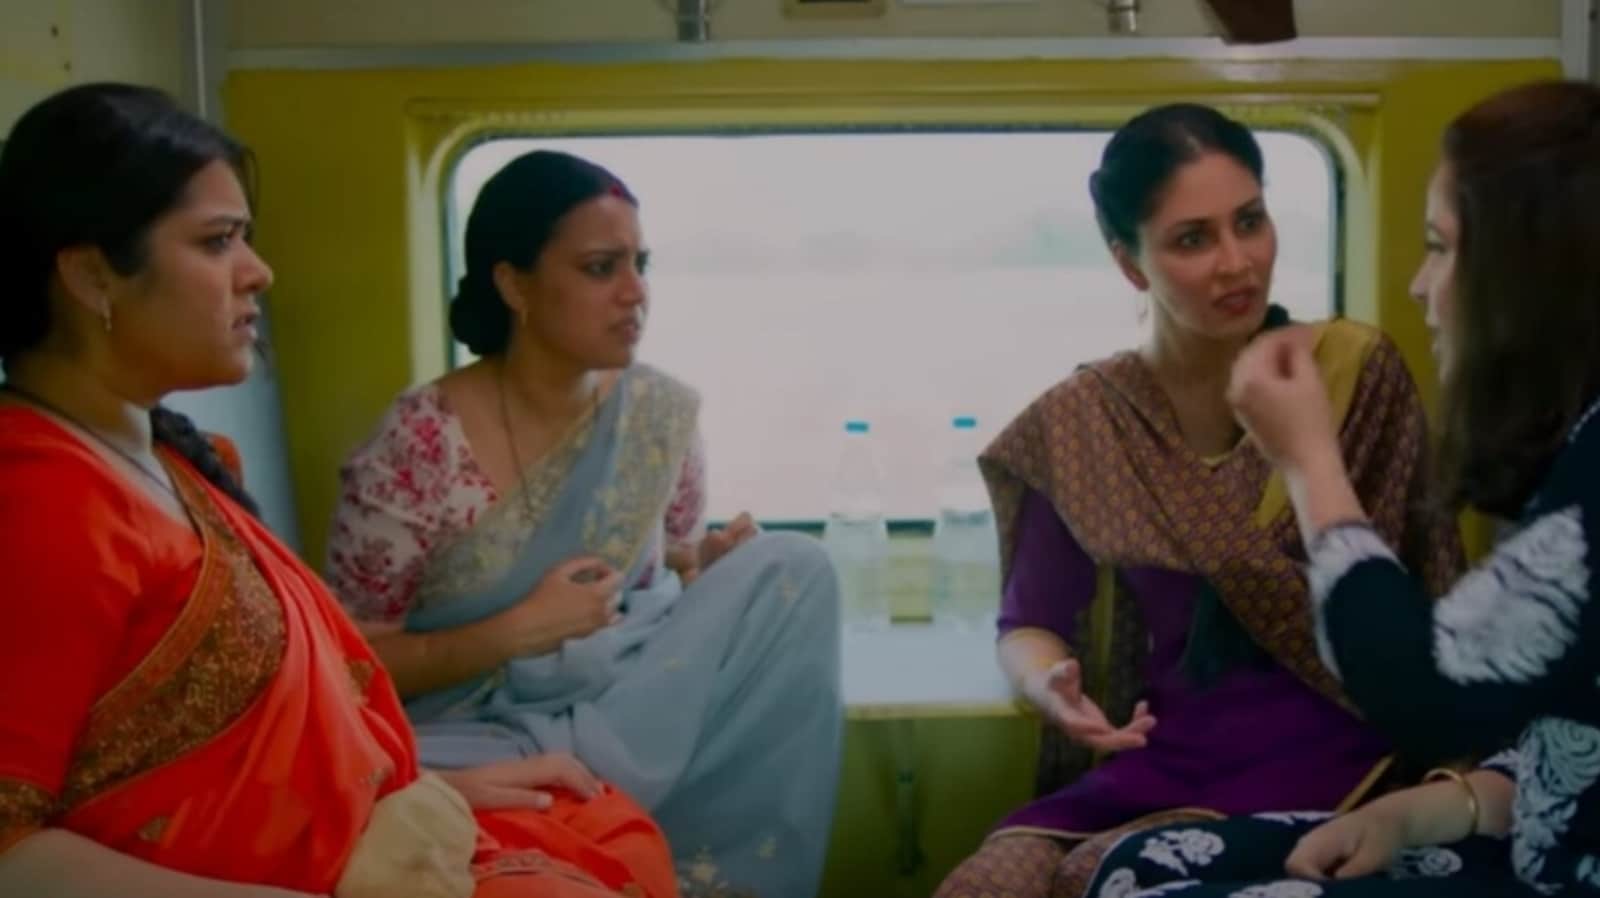 Jahaan Chaar Yaar trailer: Swara Bhasker, Shikha Talsania are middle class housewives who want to have fun in Goa. Watch